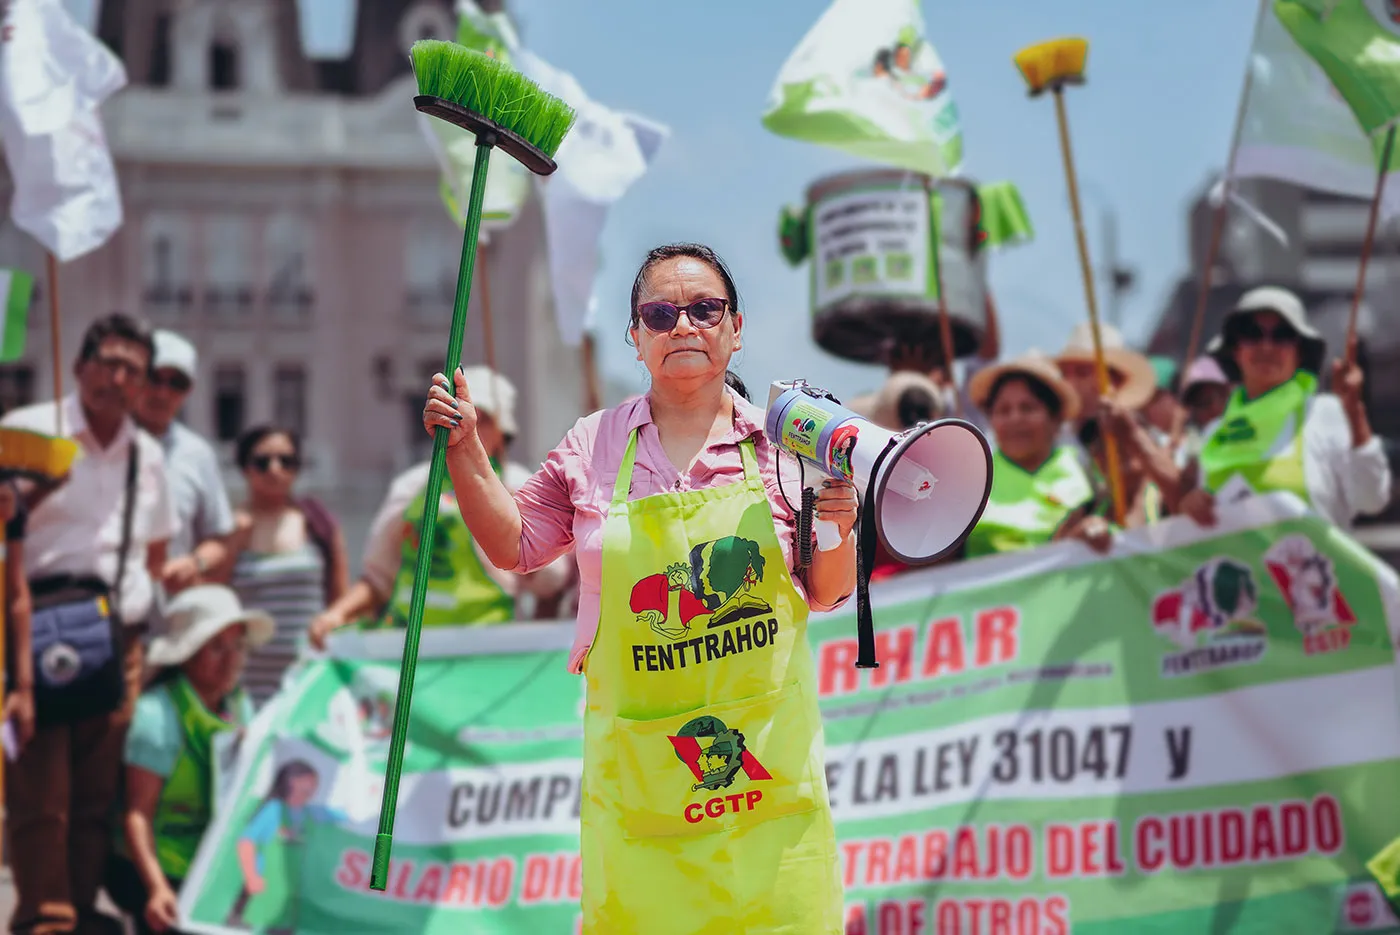 A woman wearing a neon yellow apron leads a march. She's holding a broom in one hand and a megaphone in the other.